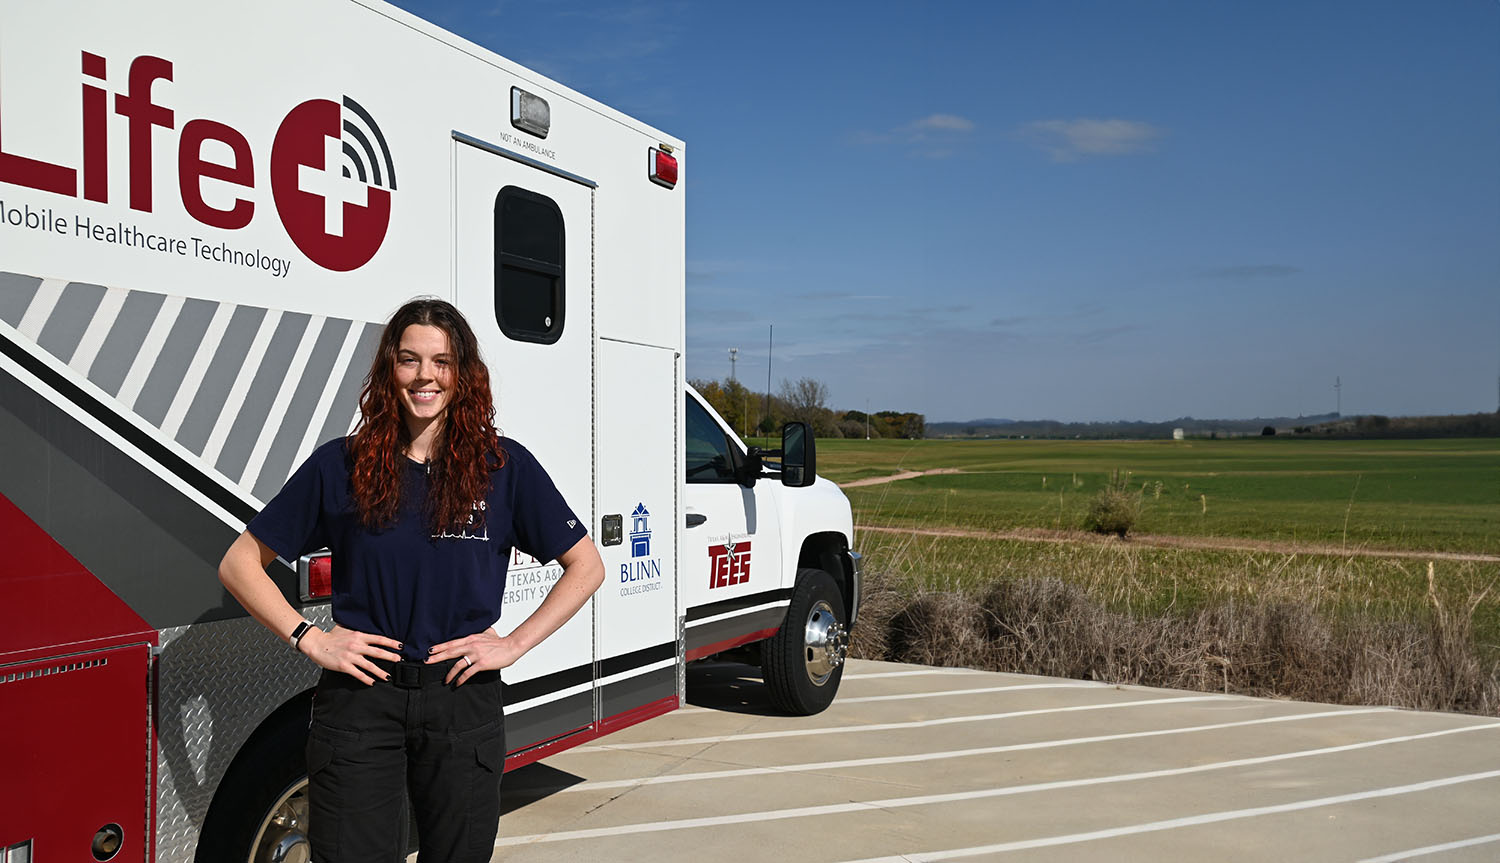 Sally Osth finds fulfillment and gains nationally recognized credentials through Blinn’s Emergency Medical Services Program